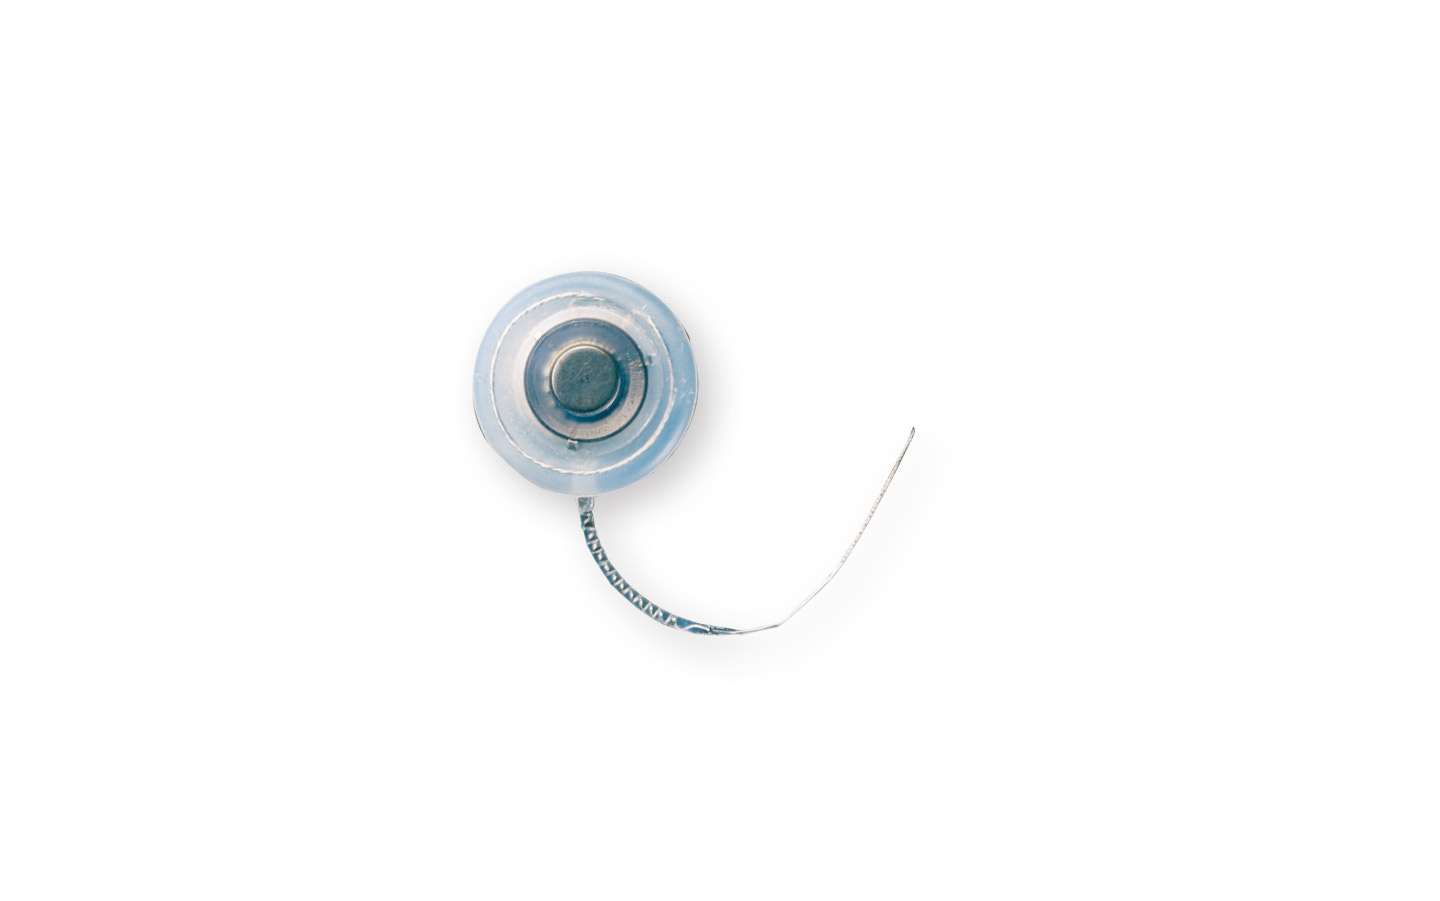 A multichannel cochlear implant